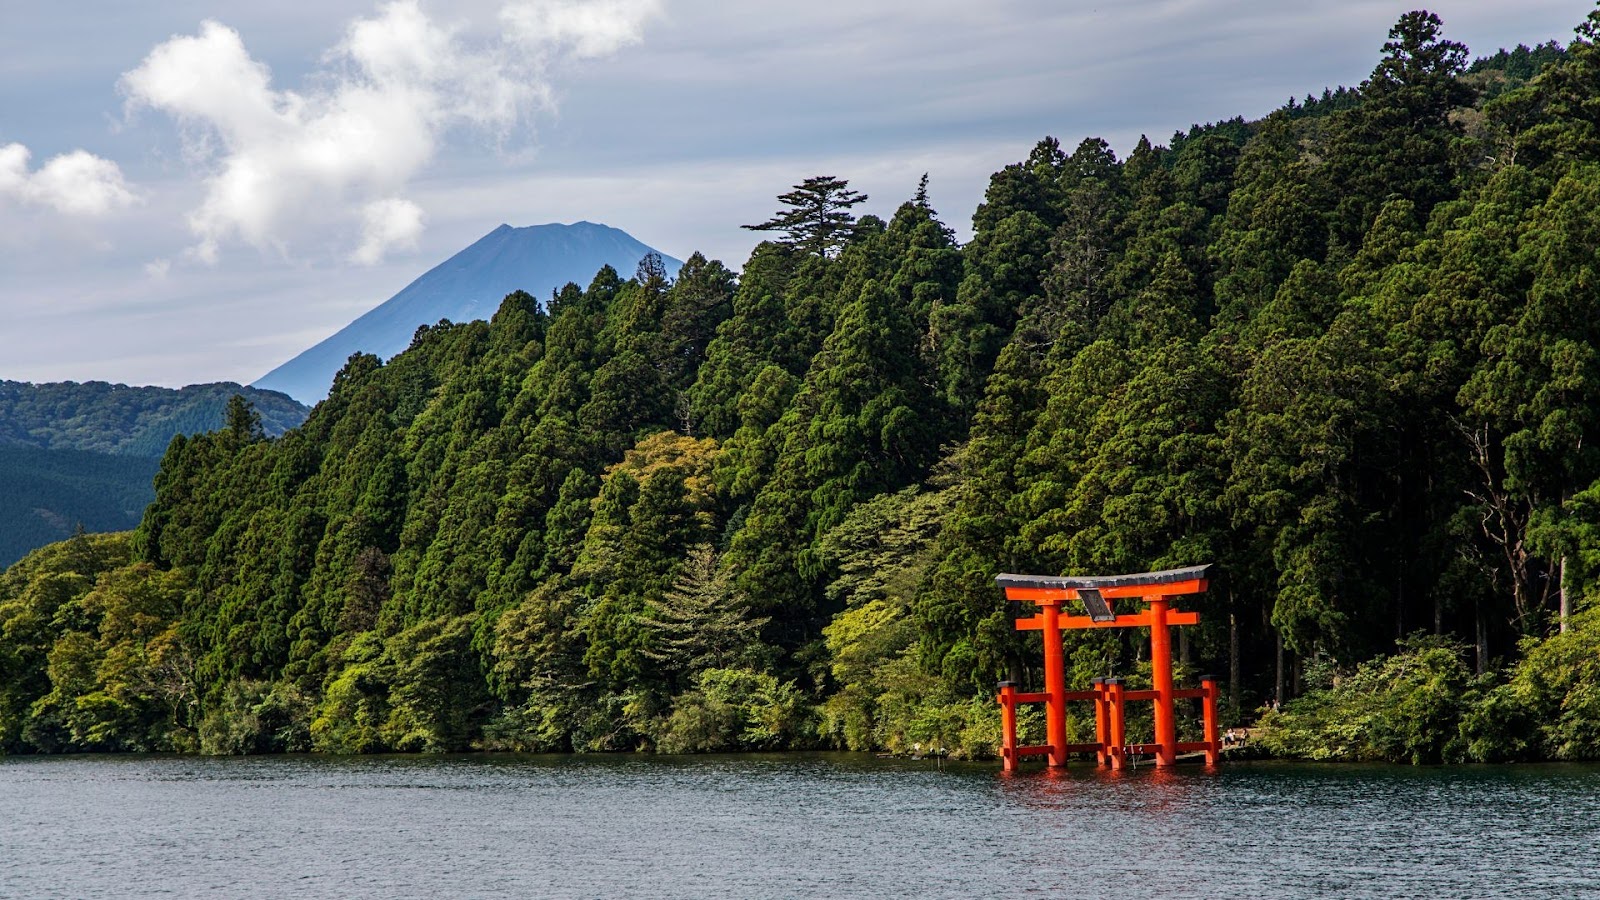 Best Vacation Spots for Couples - Hakone Japan